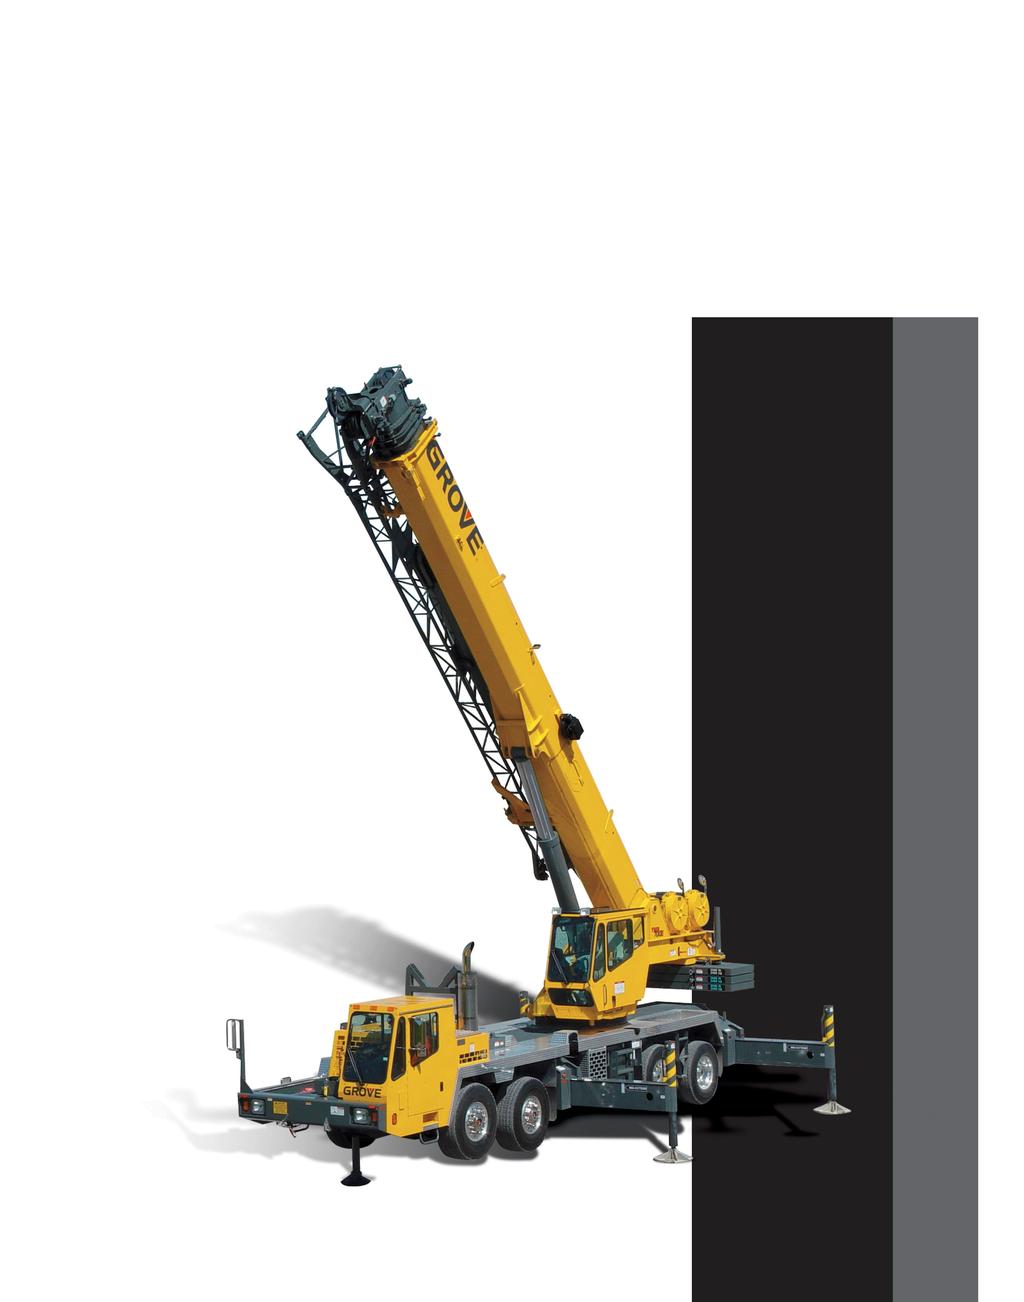 TMS0E product guide features or ton ( or mt) Capacity 36 ft.-1 ft. (11-33.5 m) 4 section, full power sequenced synchronized boom 33 ft.-56 ft. (.1-17 m) offsettable bi-fold lattice swingaway extension Optional 33 ft.